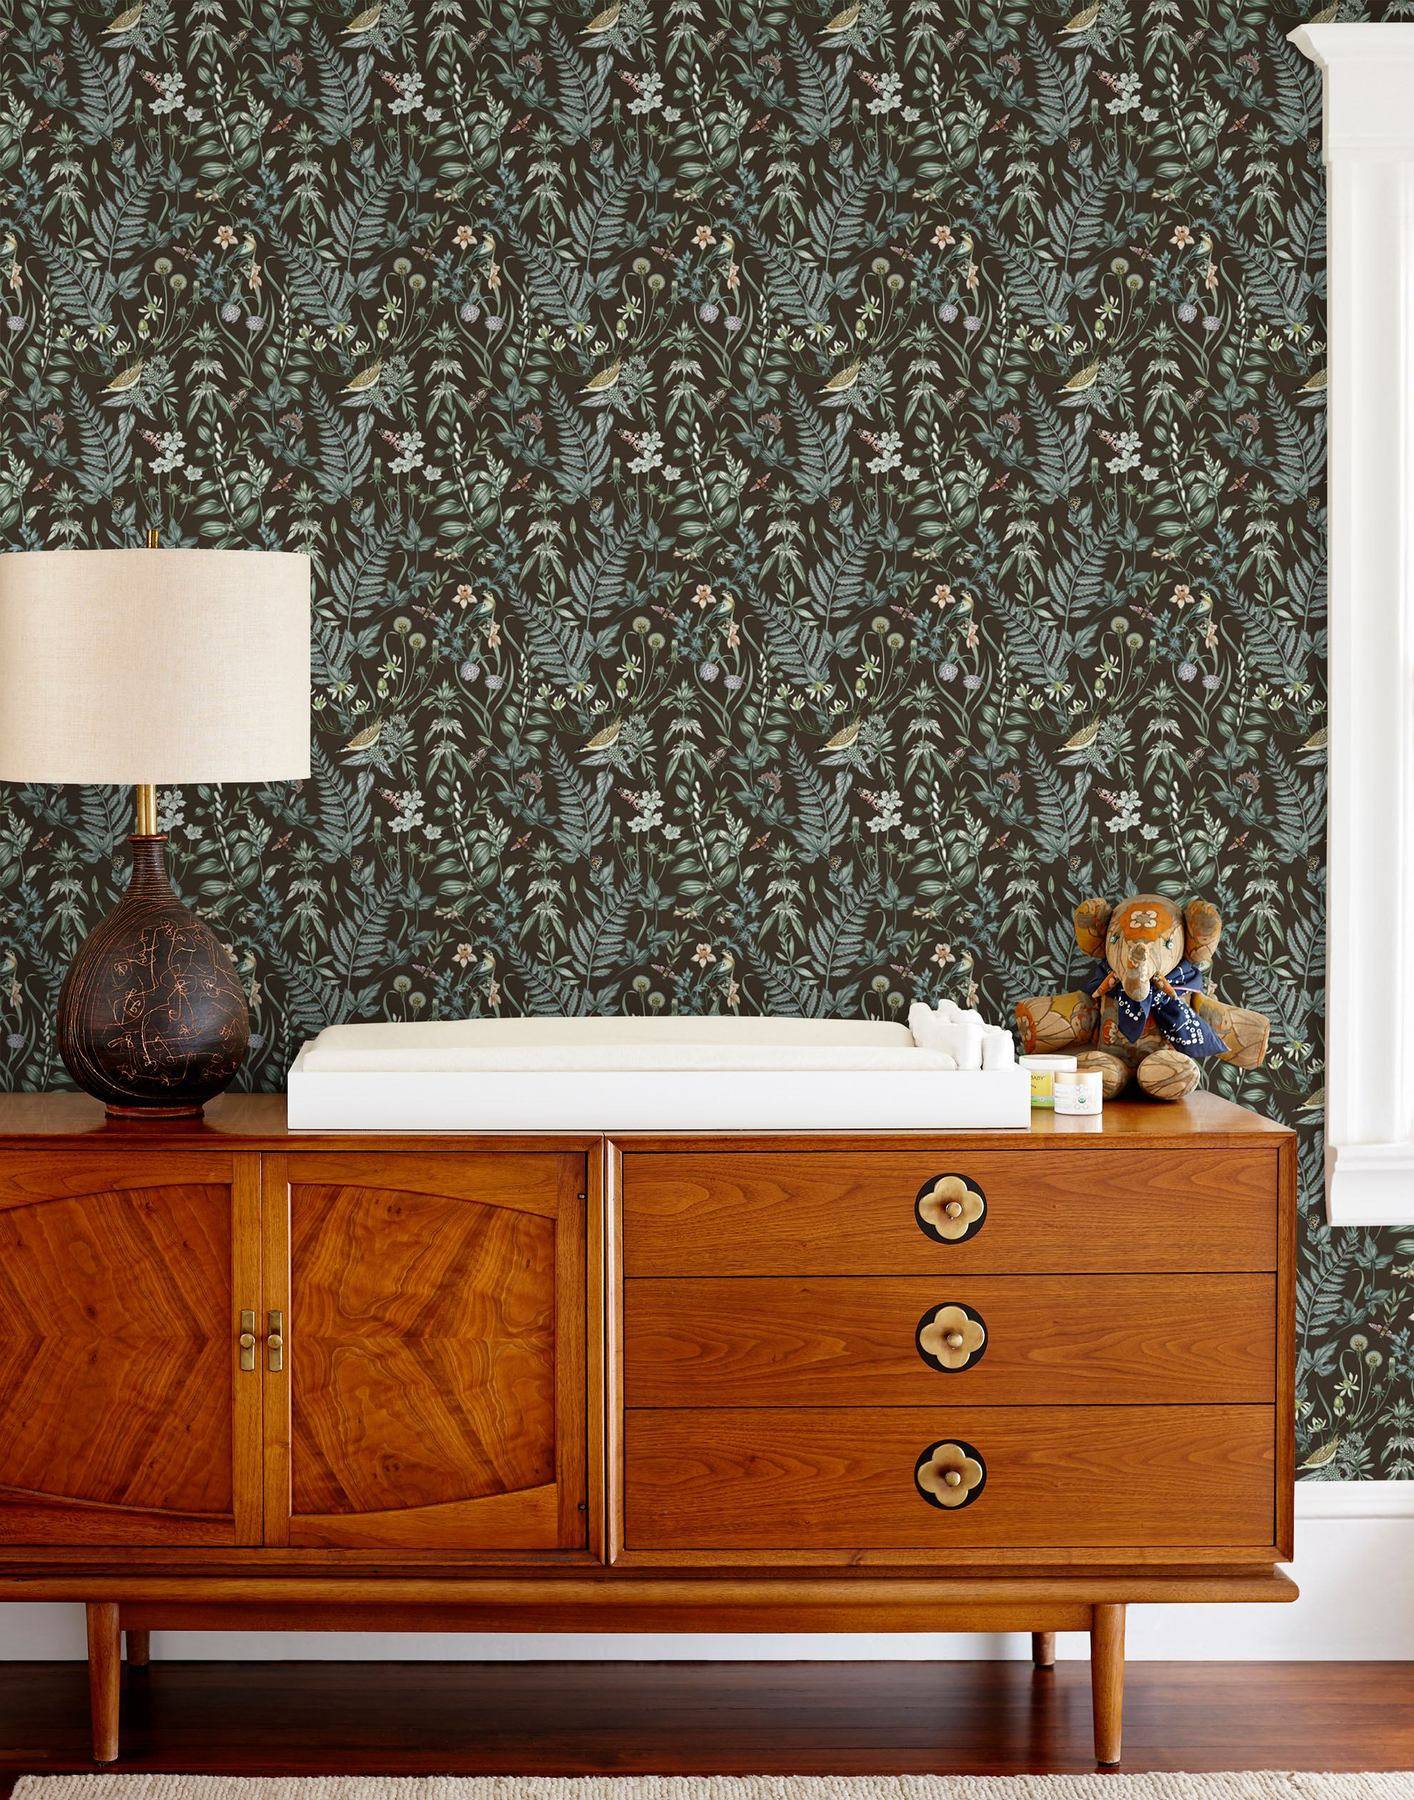 Secret Garden Wallpaper from Hygge and West